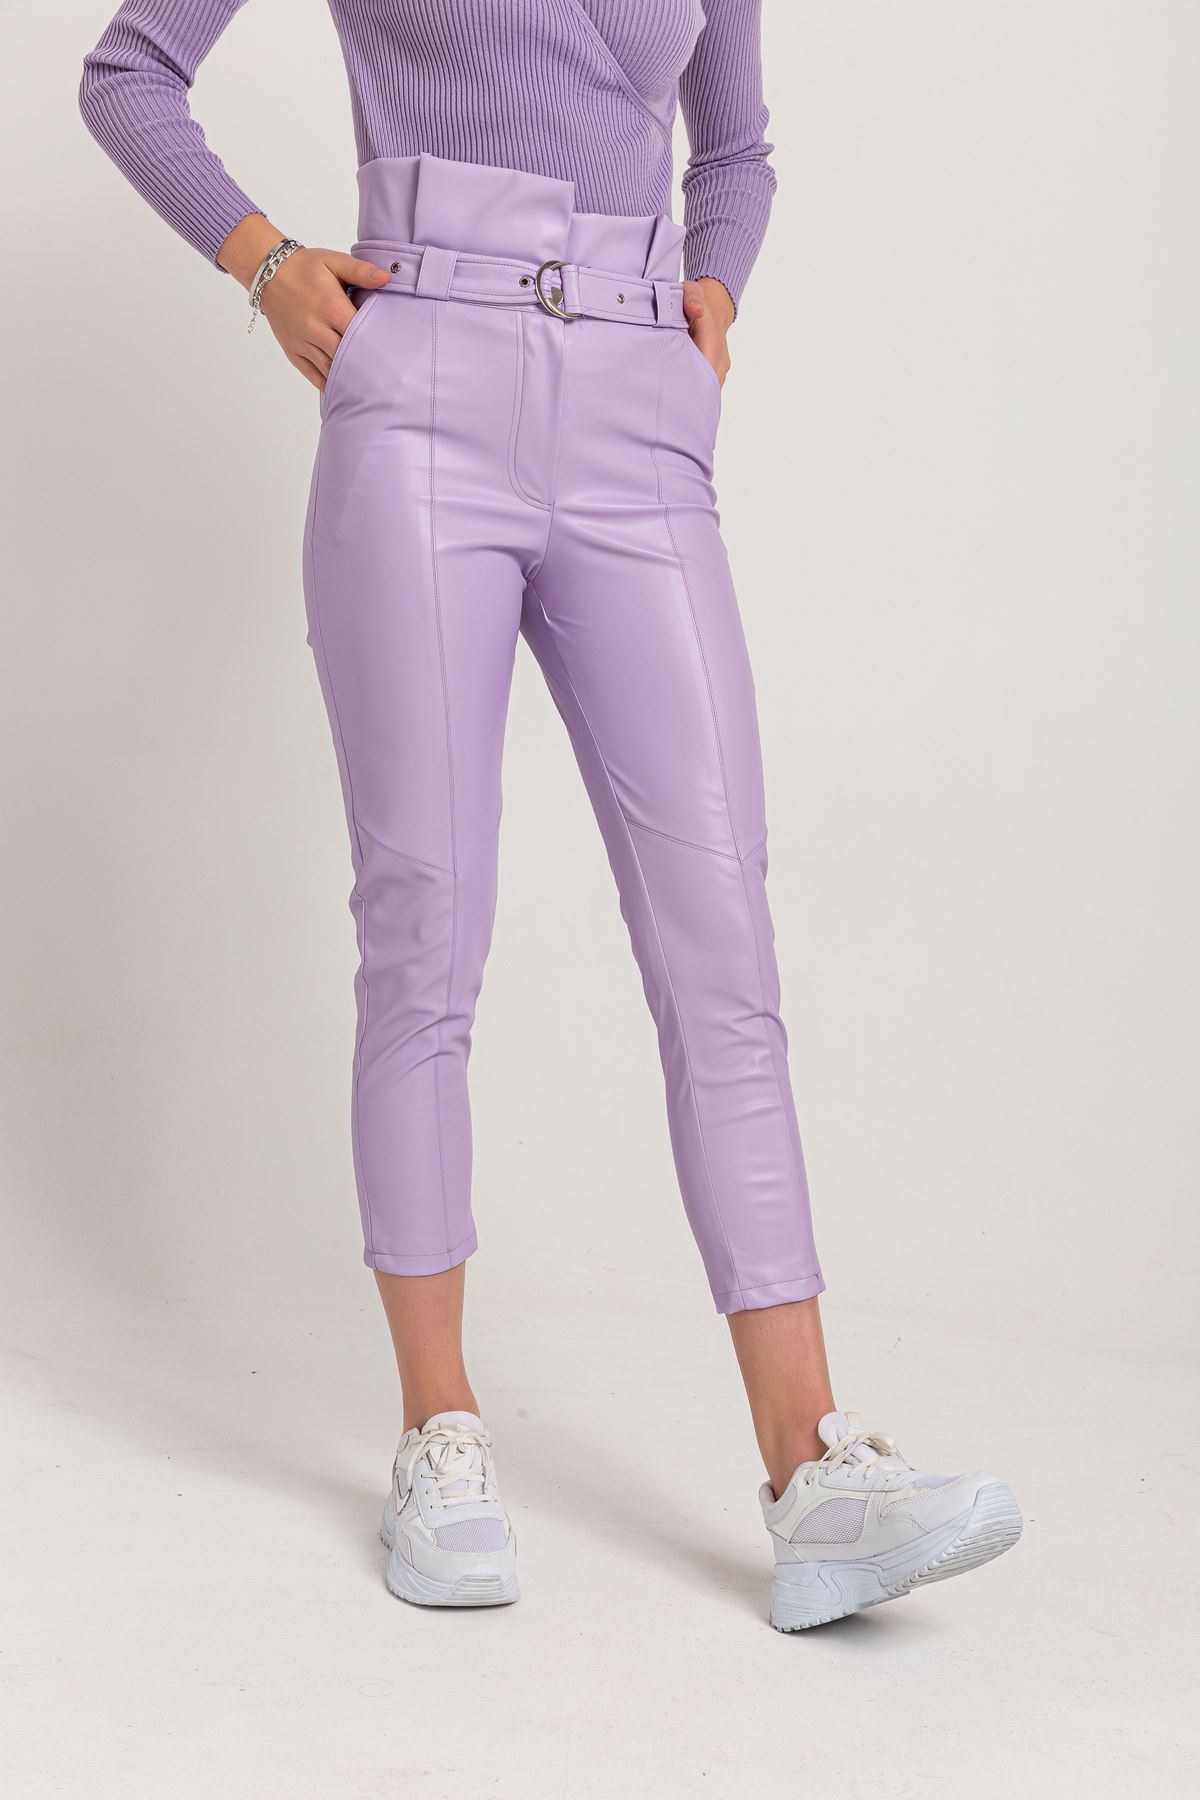 Leather Fabric Long Tigth Fit High Waist Belt Women'S Trouser - Lilac